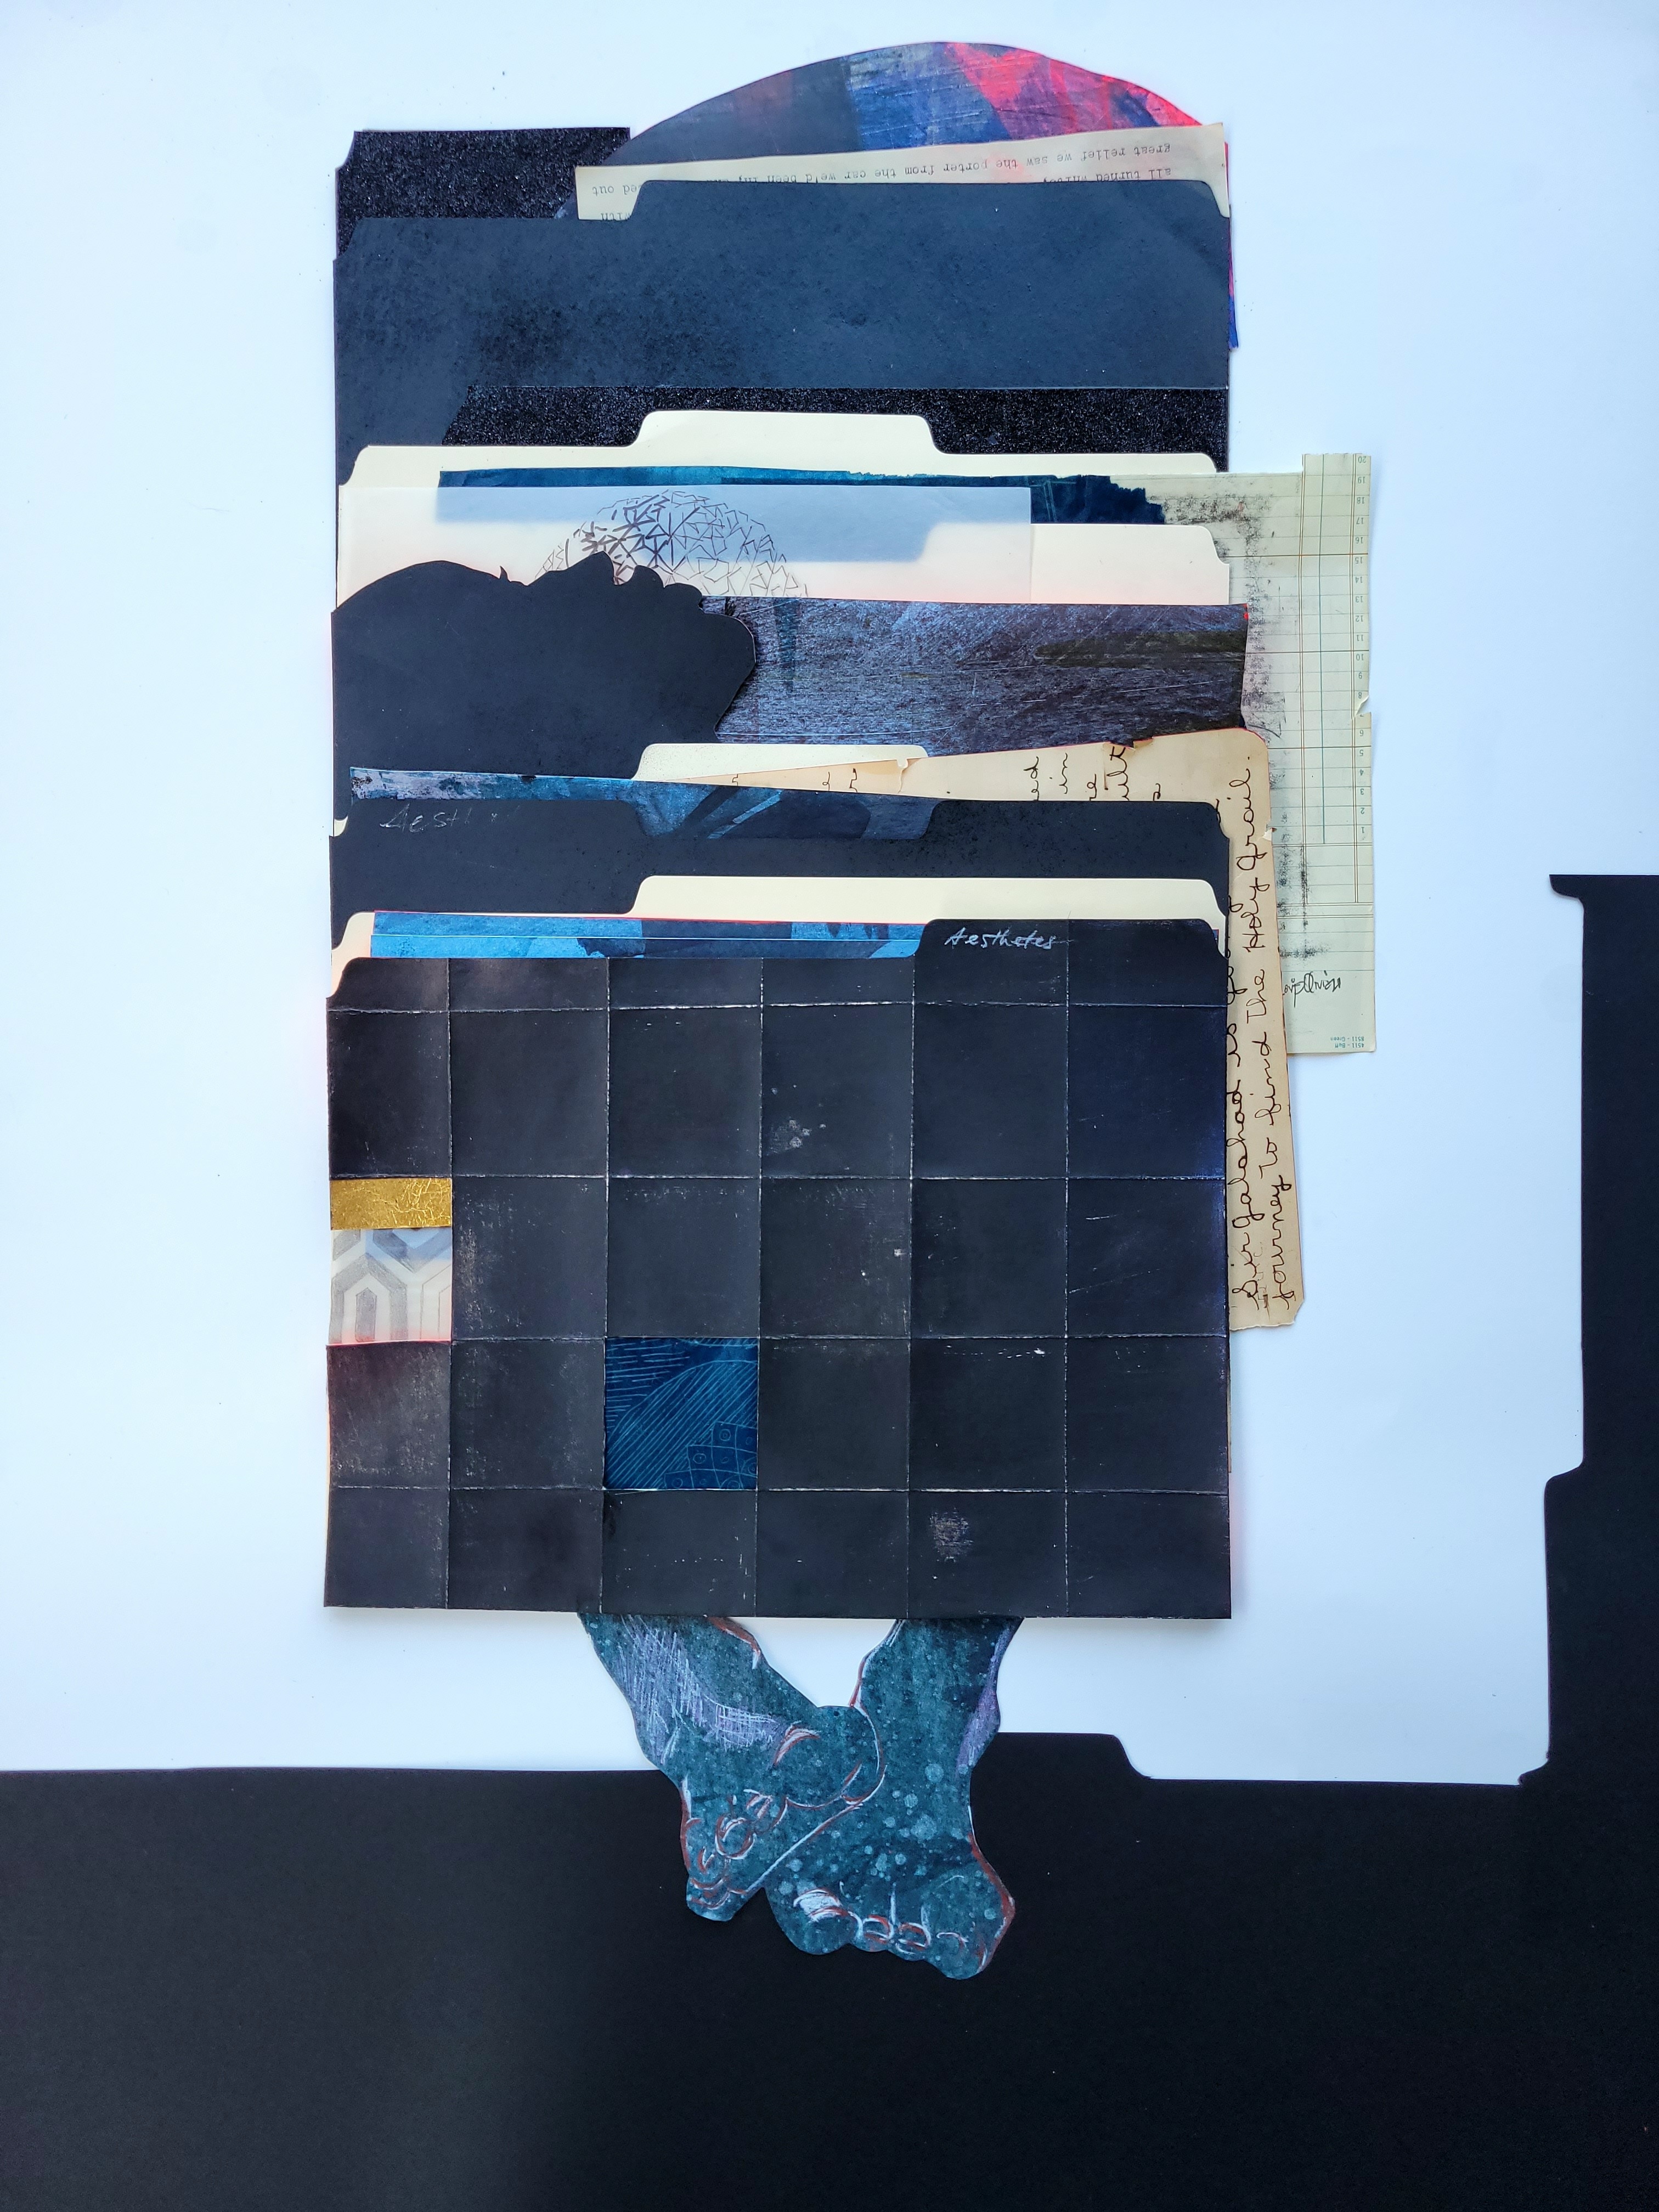 Lovie Olivia b. 1975, Houston, Texas; active in Houston, Texas Dark Tower 1.0 2021 Squid ink, indigo paste, blue carbon, acrylic, glitter vellum, gold leaf, graphite, found pages, and archival paper on cut archival file folders 31 1/2 x 23 1/2 in. Private collection, New York , c ourtesy of the artist , © Lovie Olivia